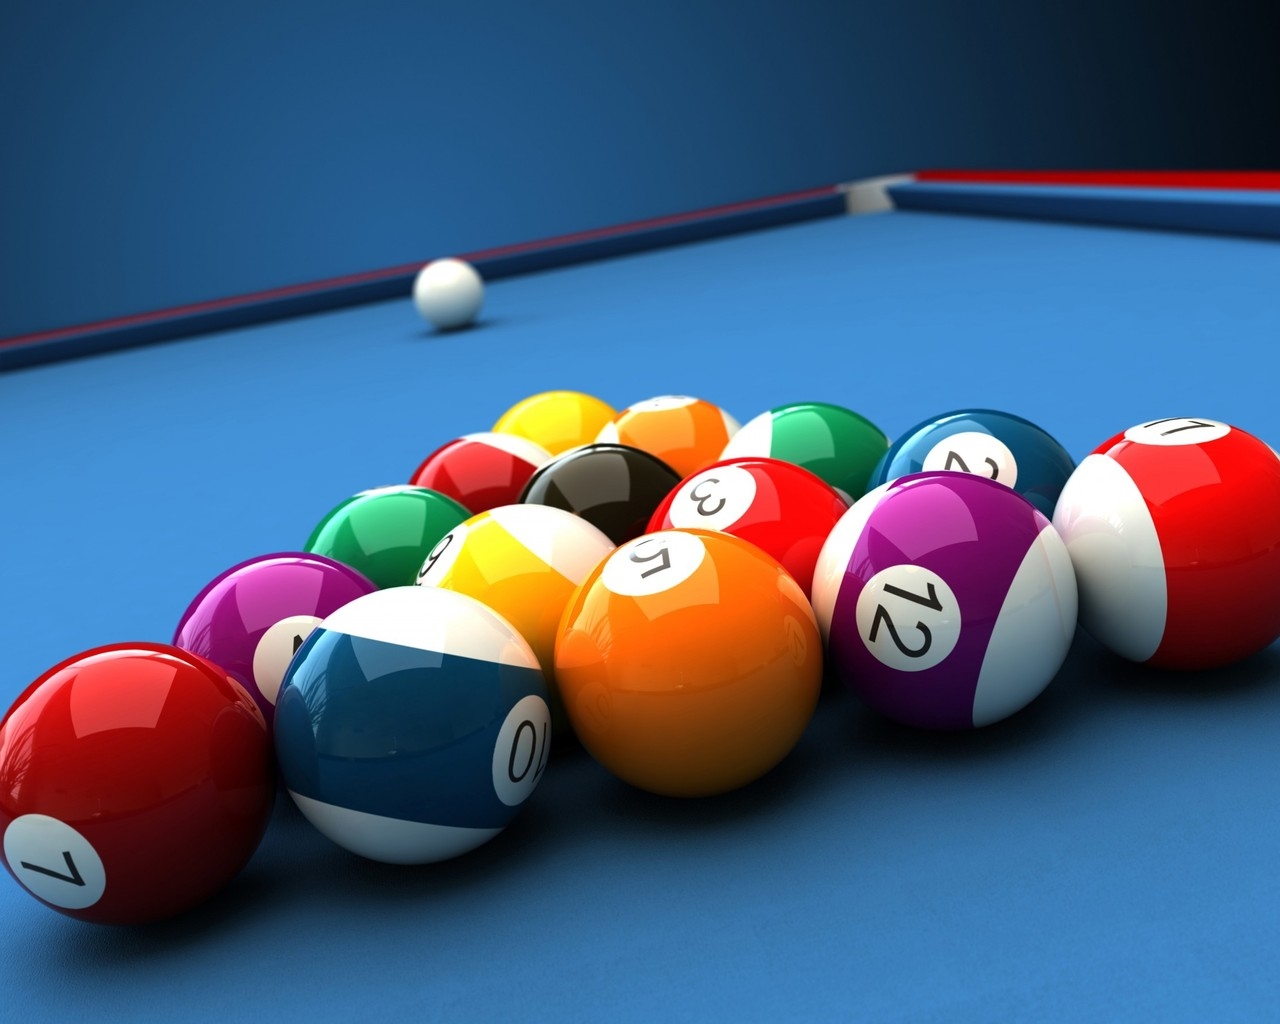 Billiards Table and Balls for 1280 x 1024 resolution